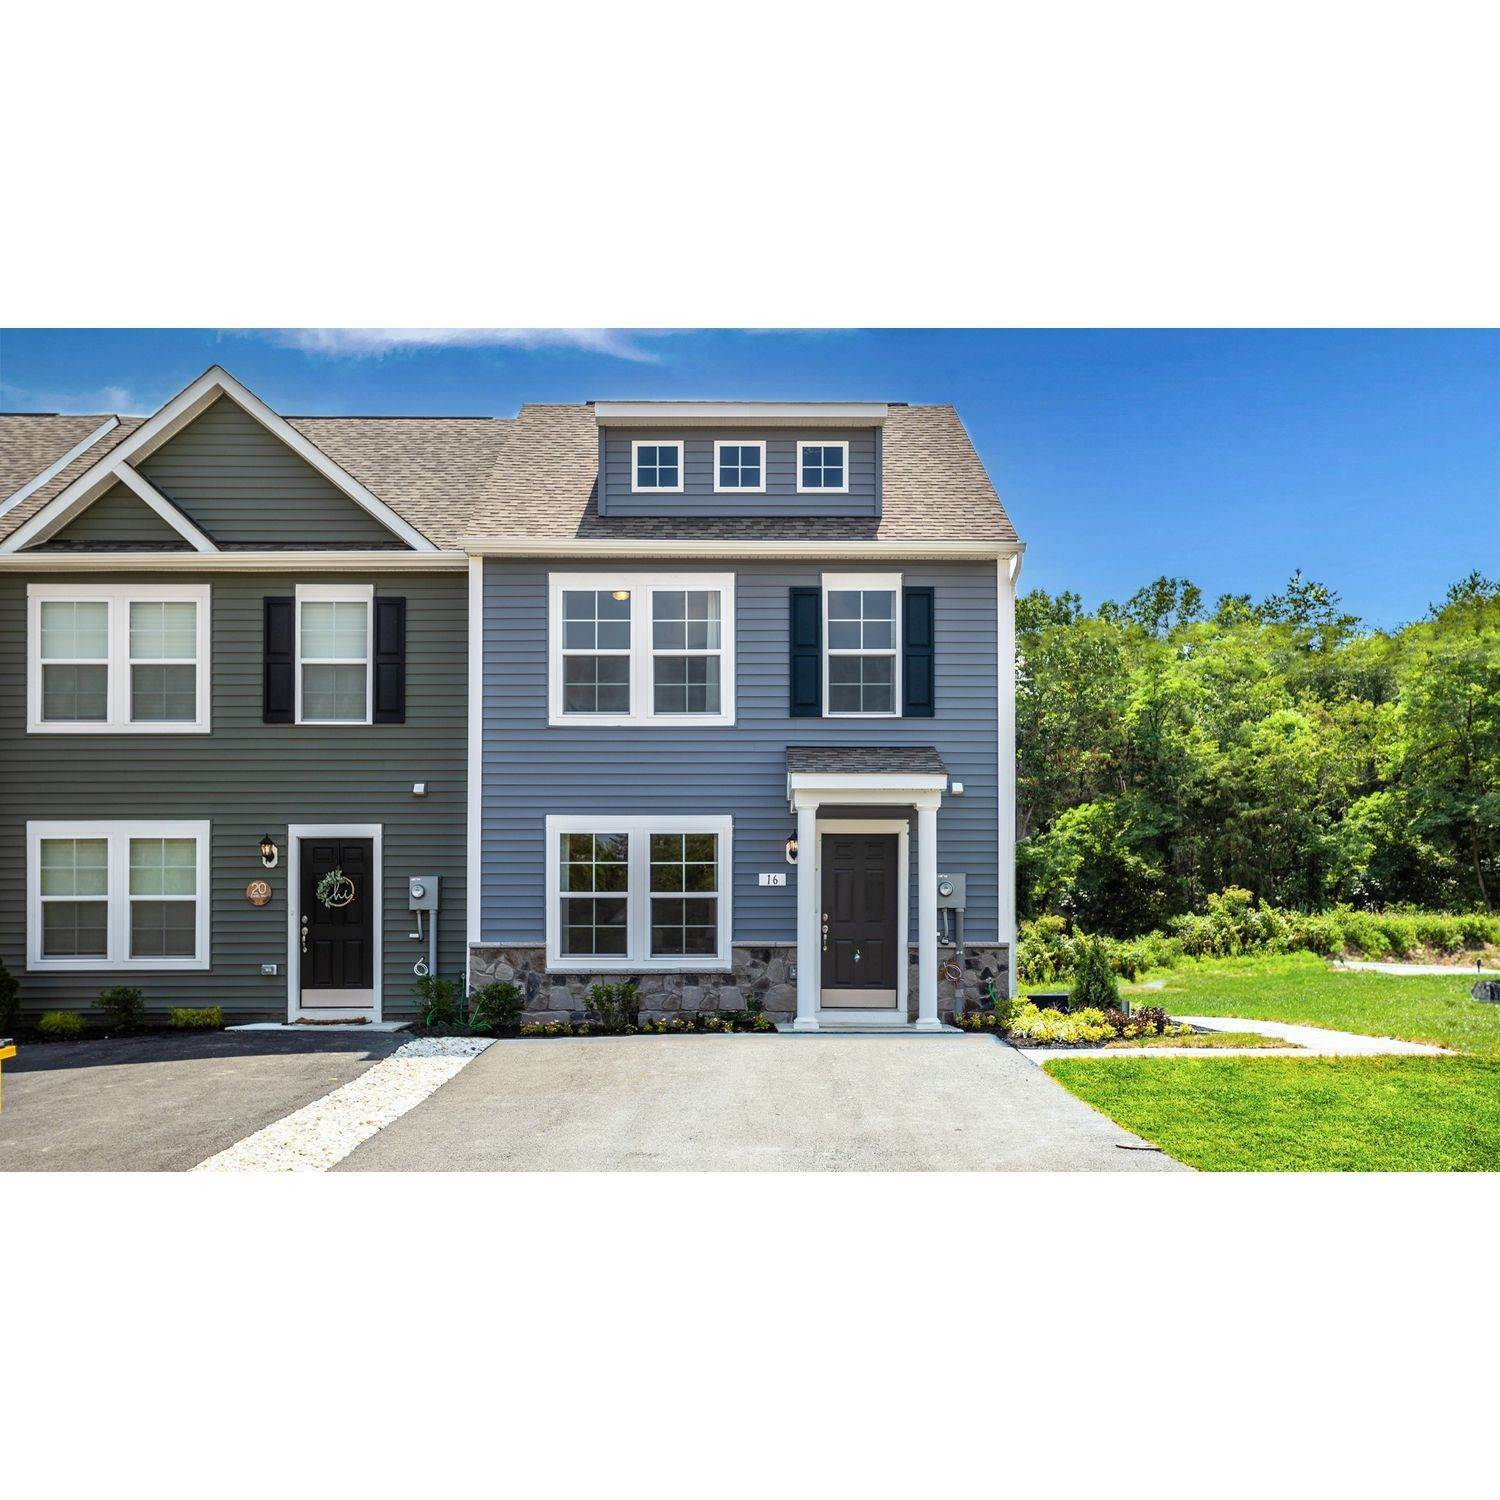 2. Whispering Pines Townhomes building at 16 Loblolly Drive, Bunker Hill, WV 25413